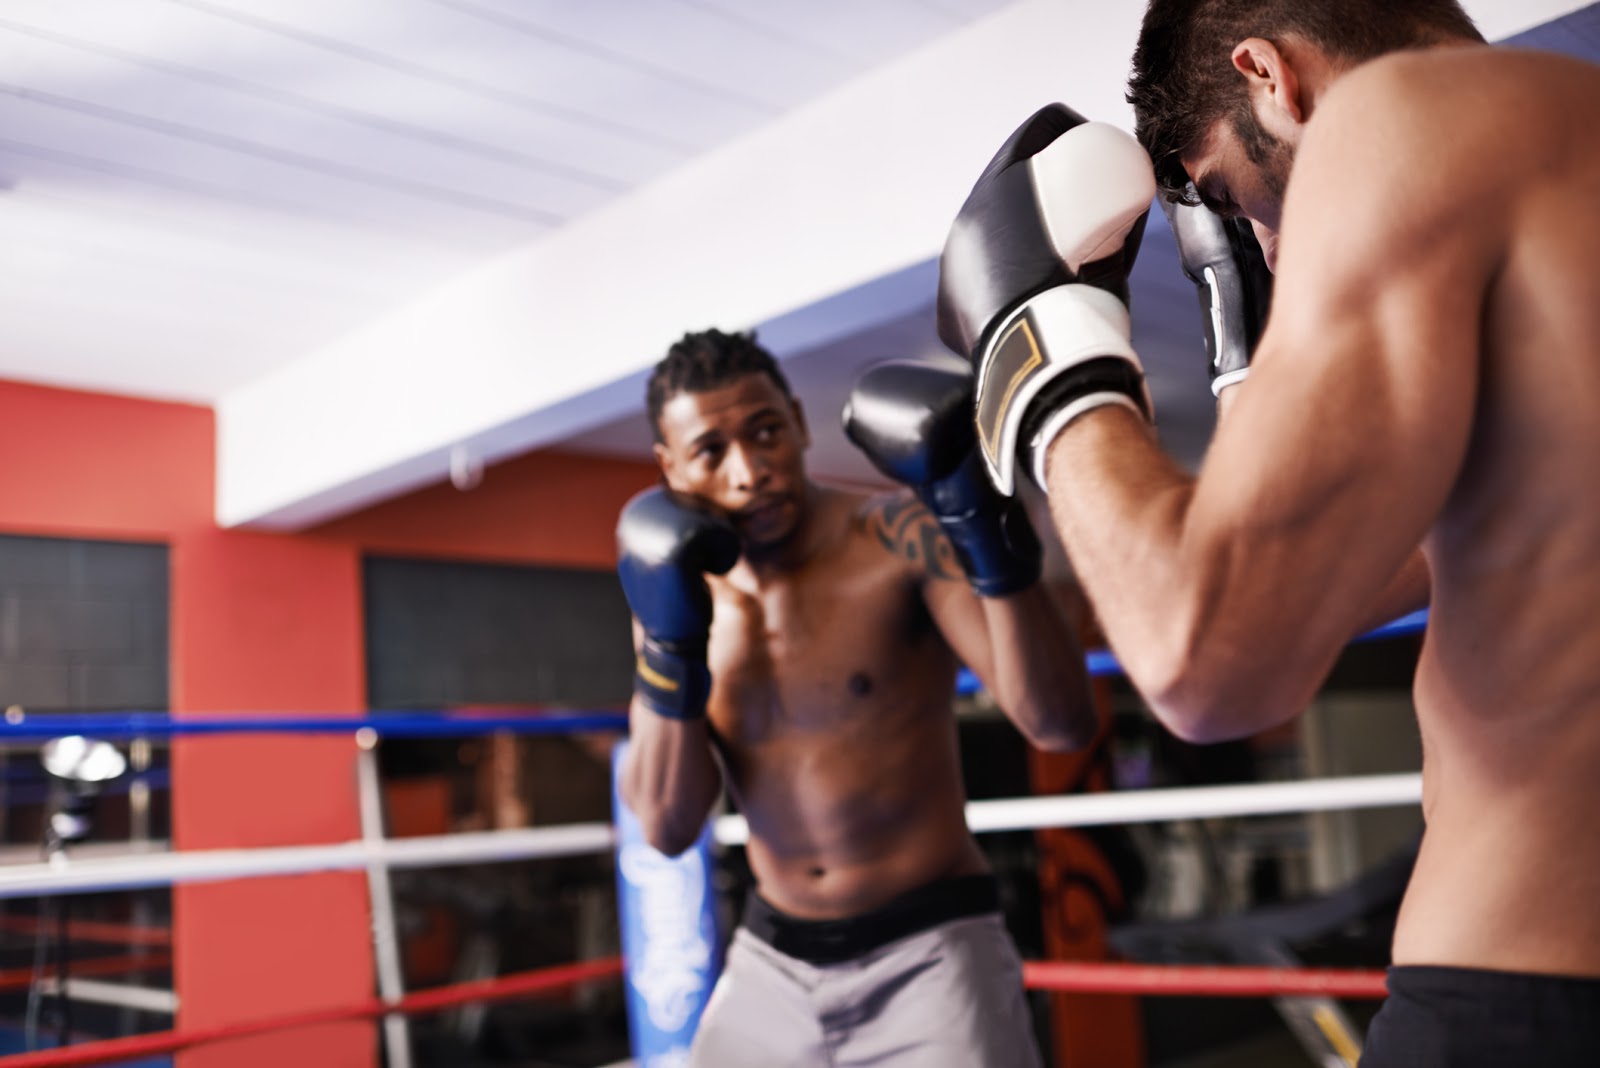 2 men with different boxing styles training in a boxing ring.